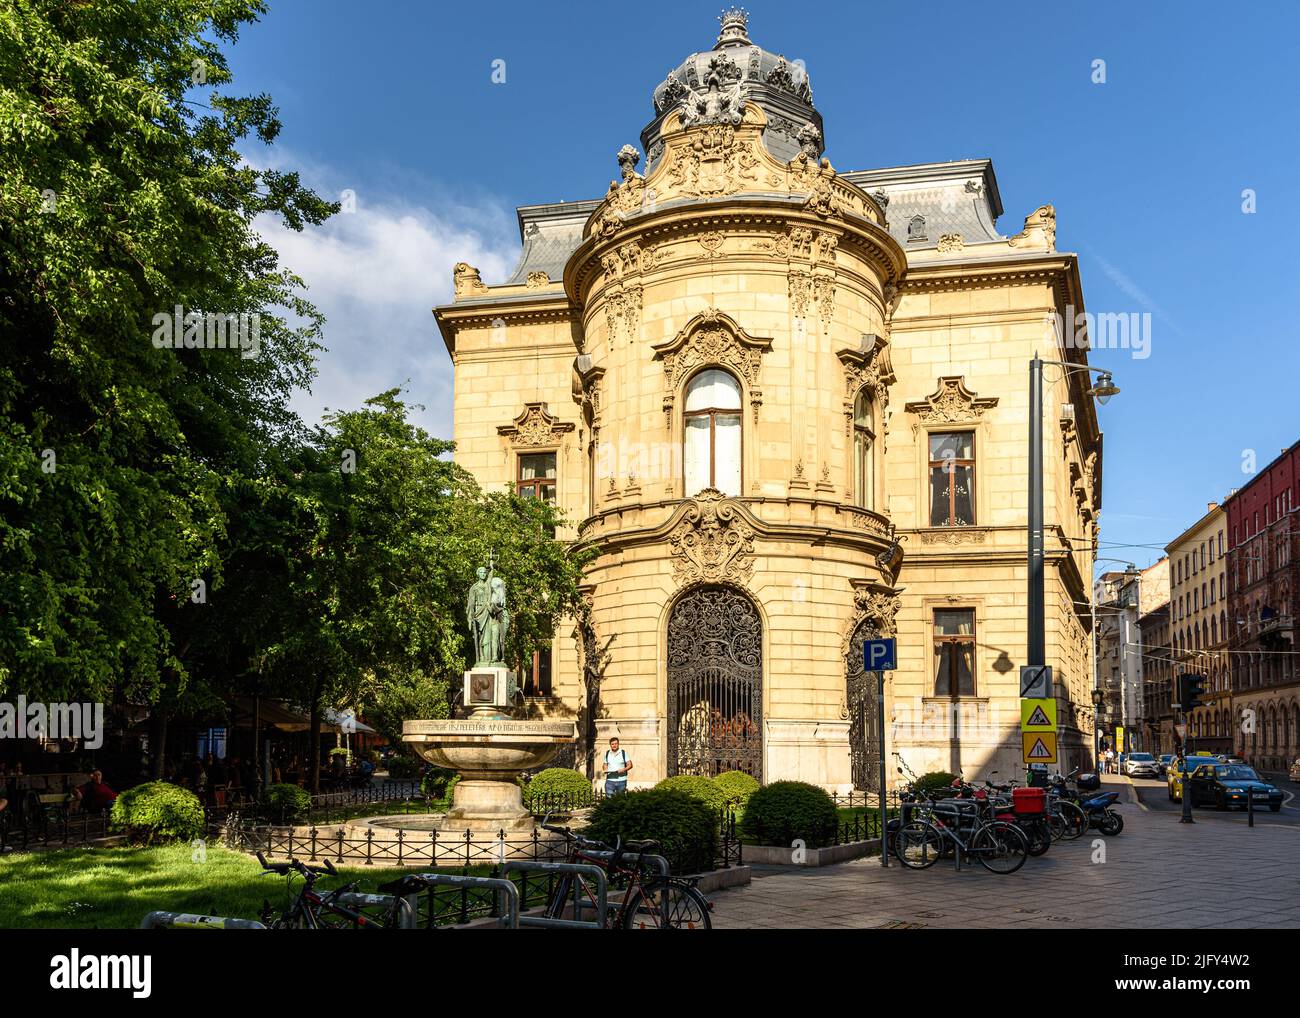 The main branch of the Szabo Ervin Public Library in Budapest, Hungary with a fountain in memory of Viscount Rothermere Stock Photo